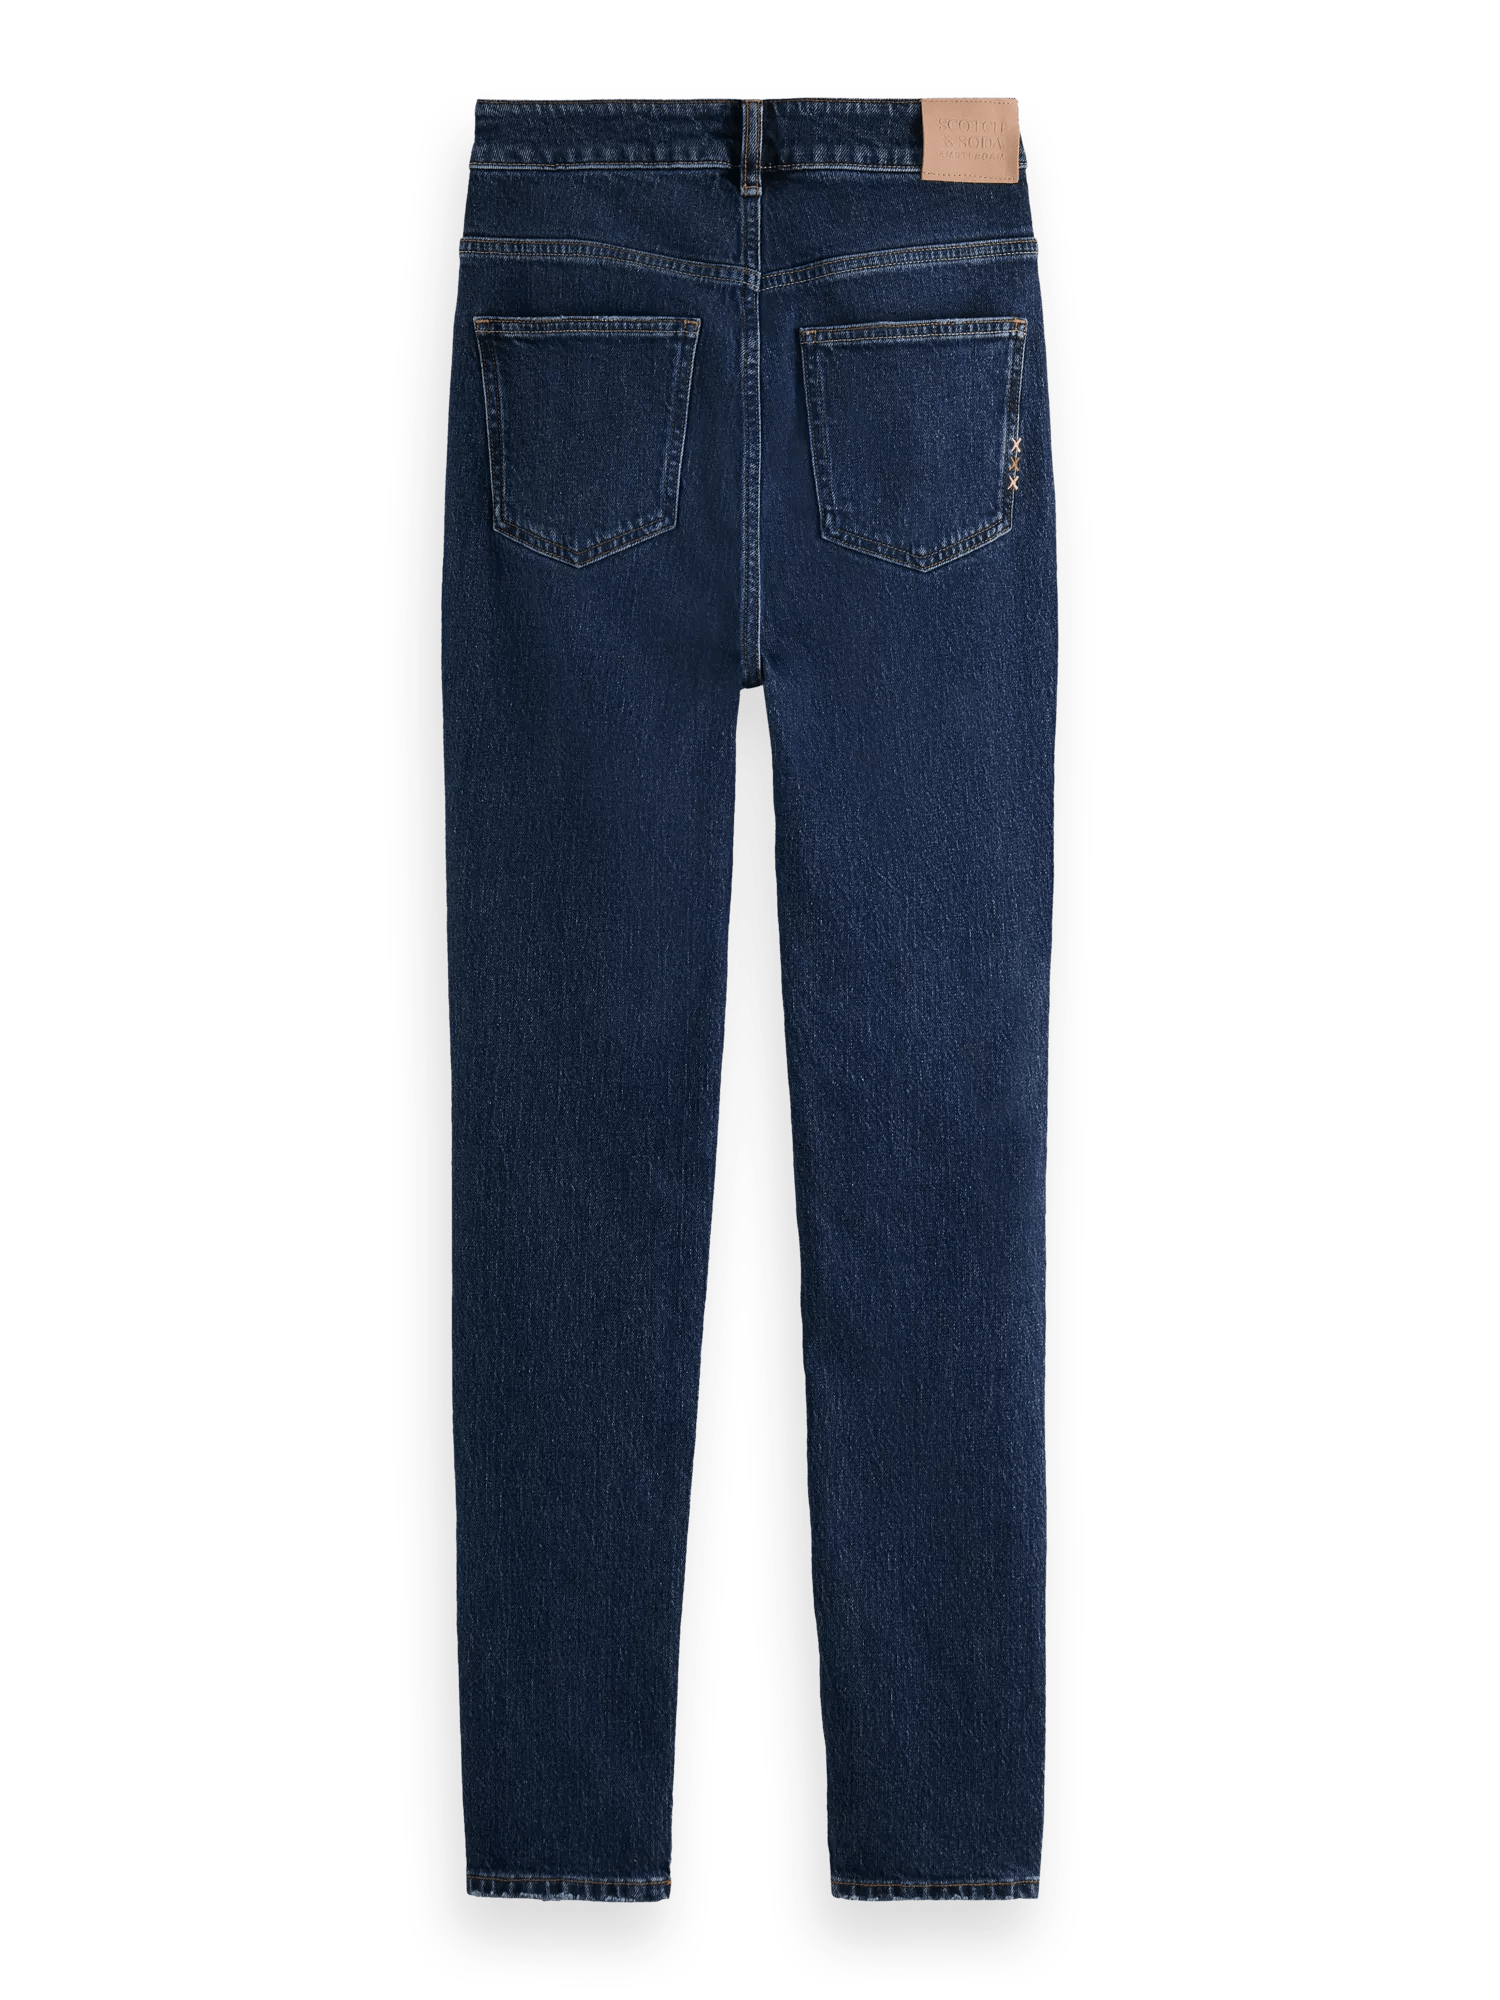 Scotch & Soda The Line high-rise skinny fit jeans BCK